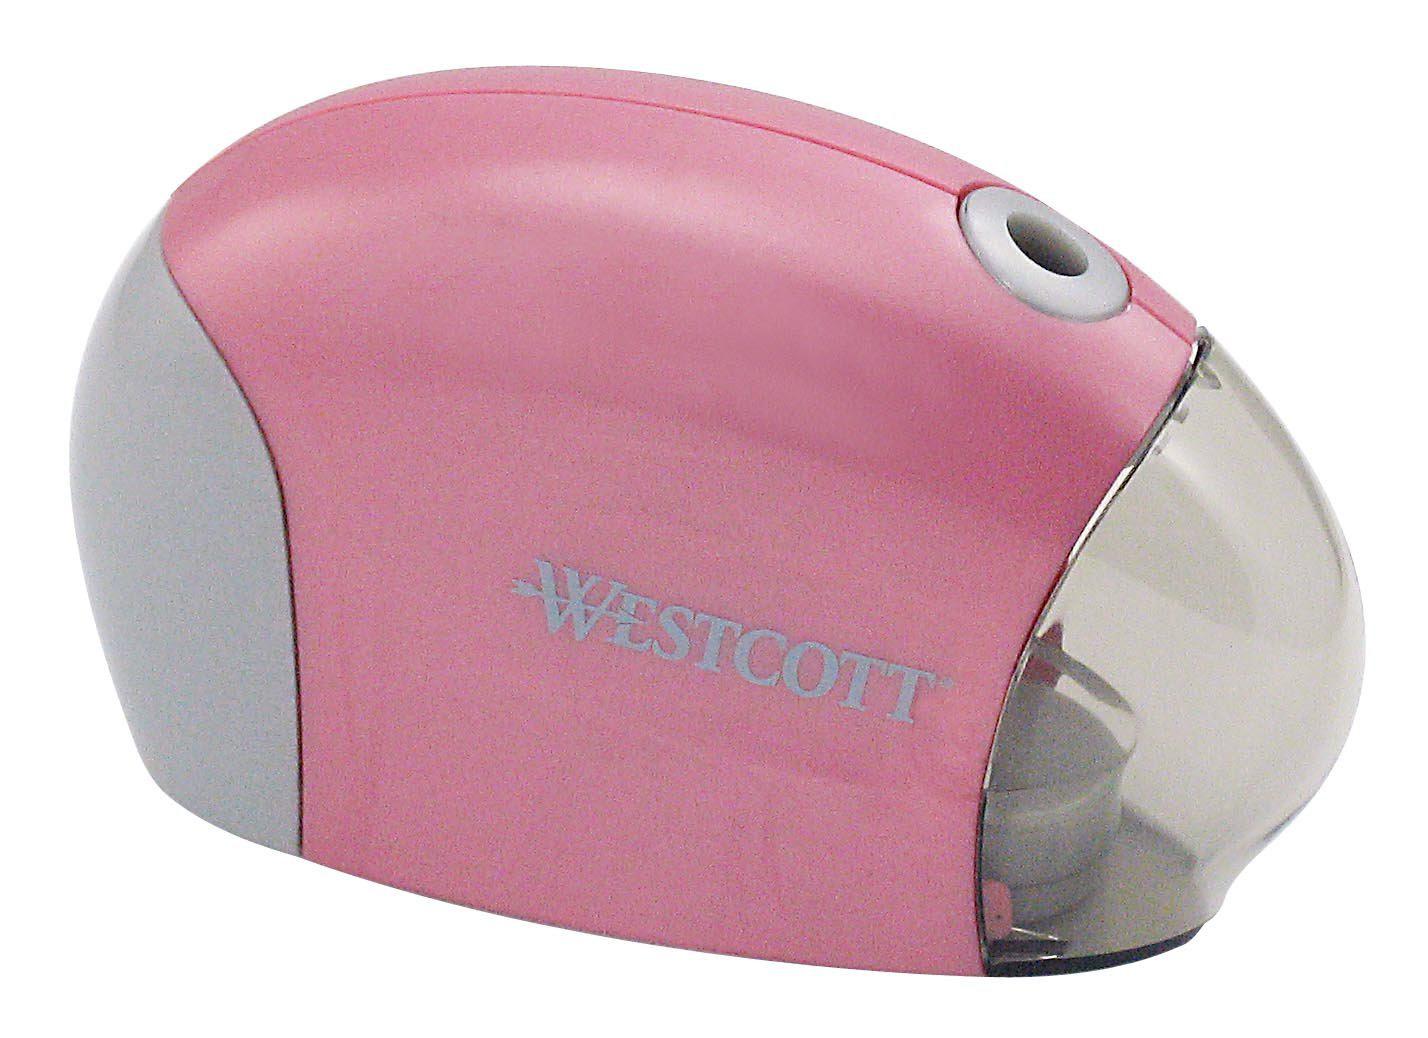 westcott student battery operated pencil sharpener, assorted colors, (14243)